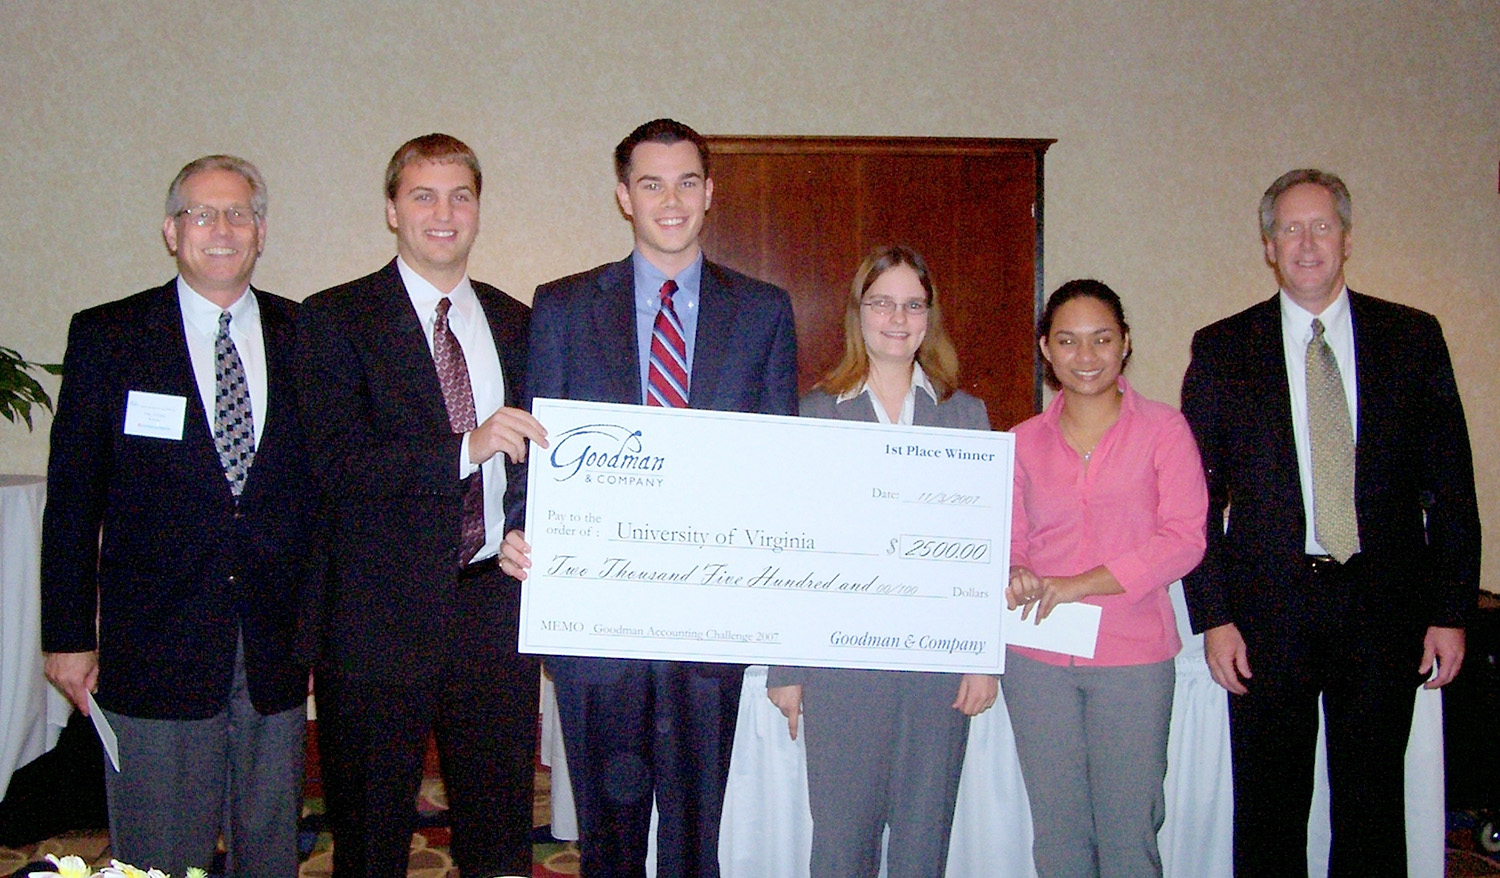 Group photo with the group holding a check for 2,500